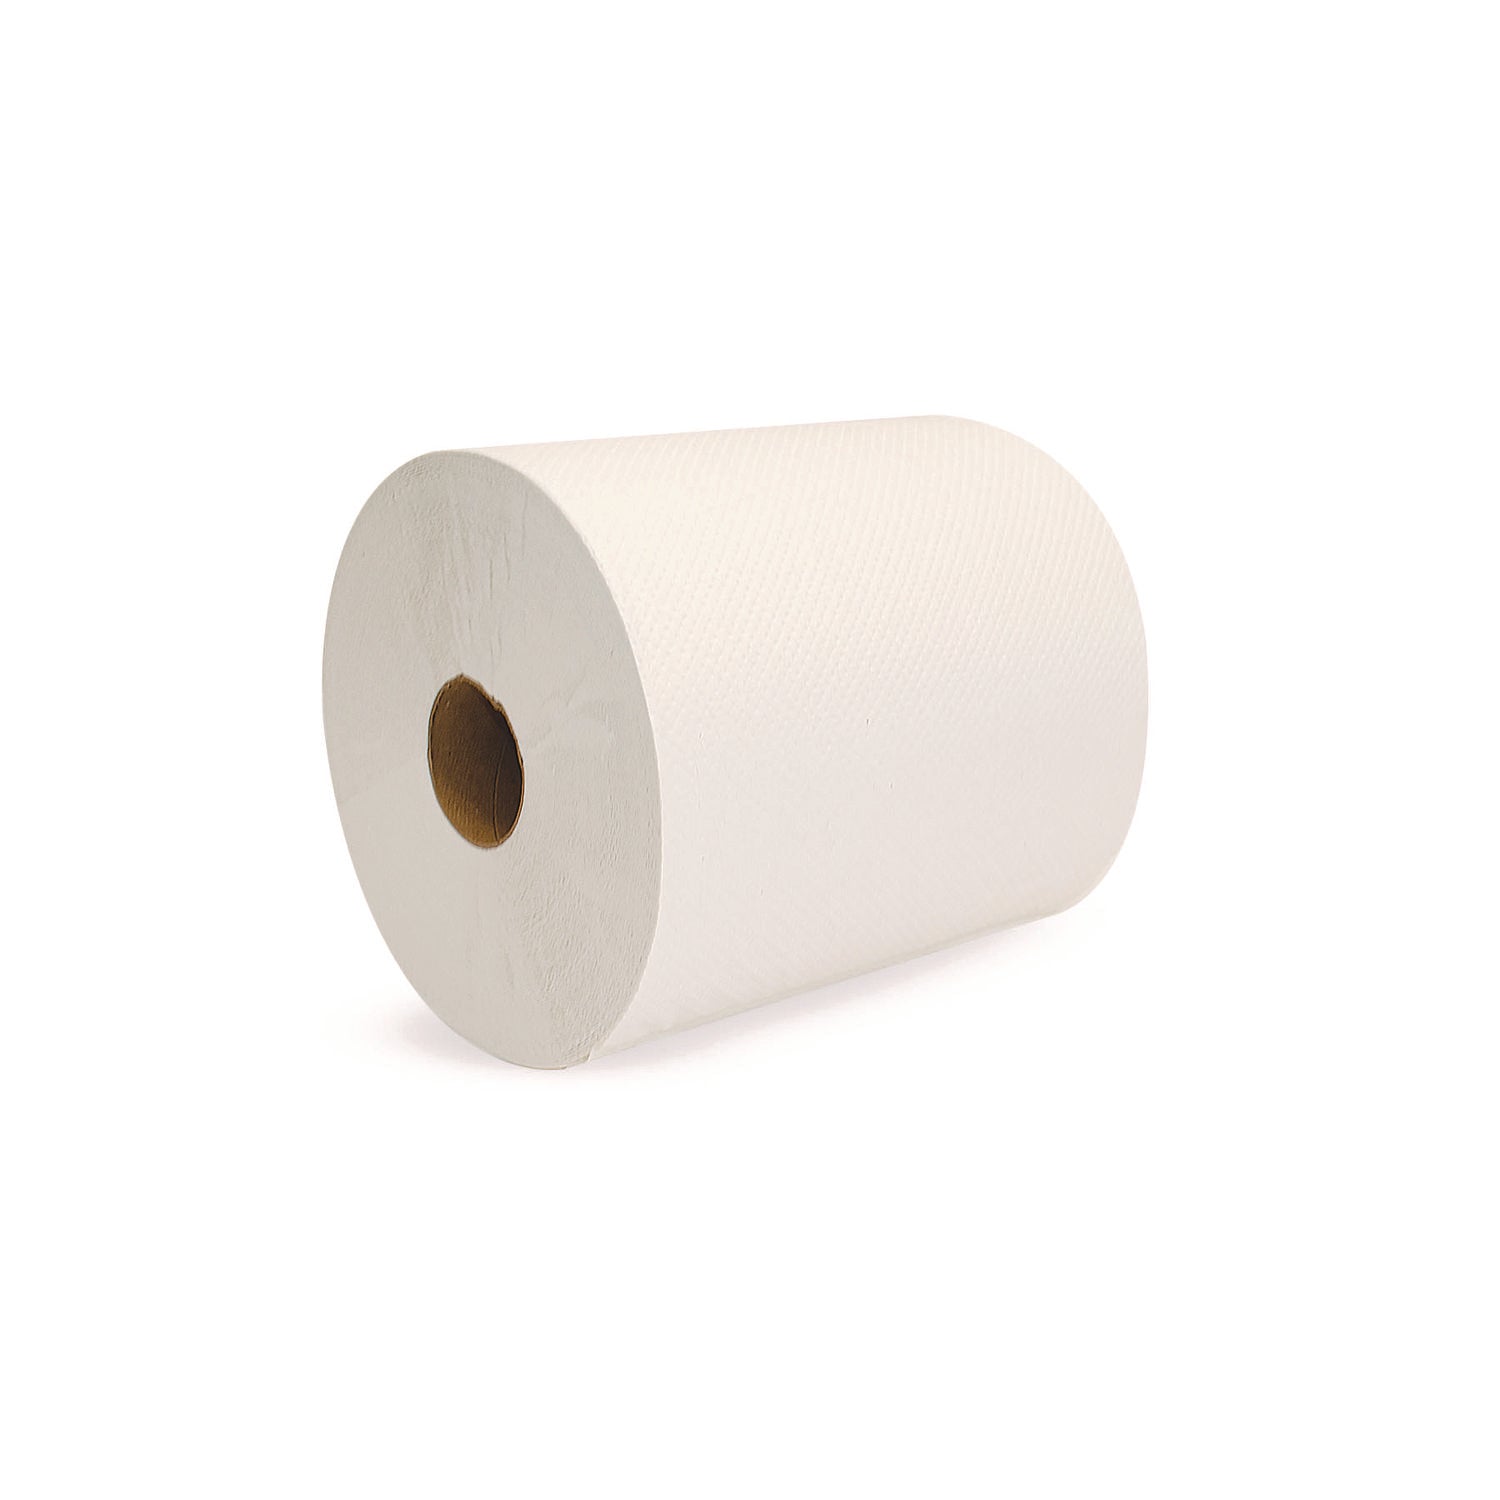 Boardwalk Green Universal Roll Towels, 1-Ply, 8" x 800 ft, Natural White, 6 Rolls/Carton - 